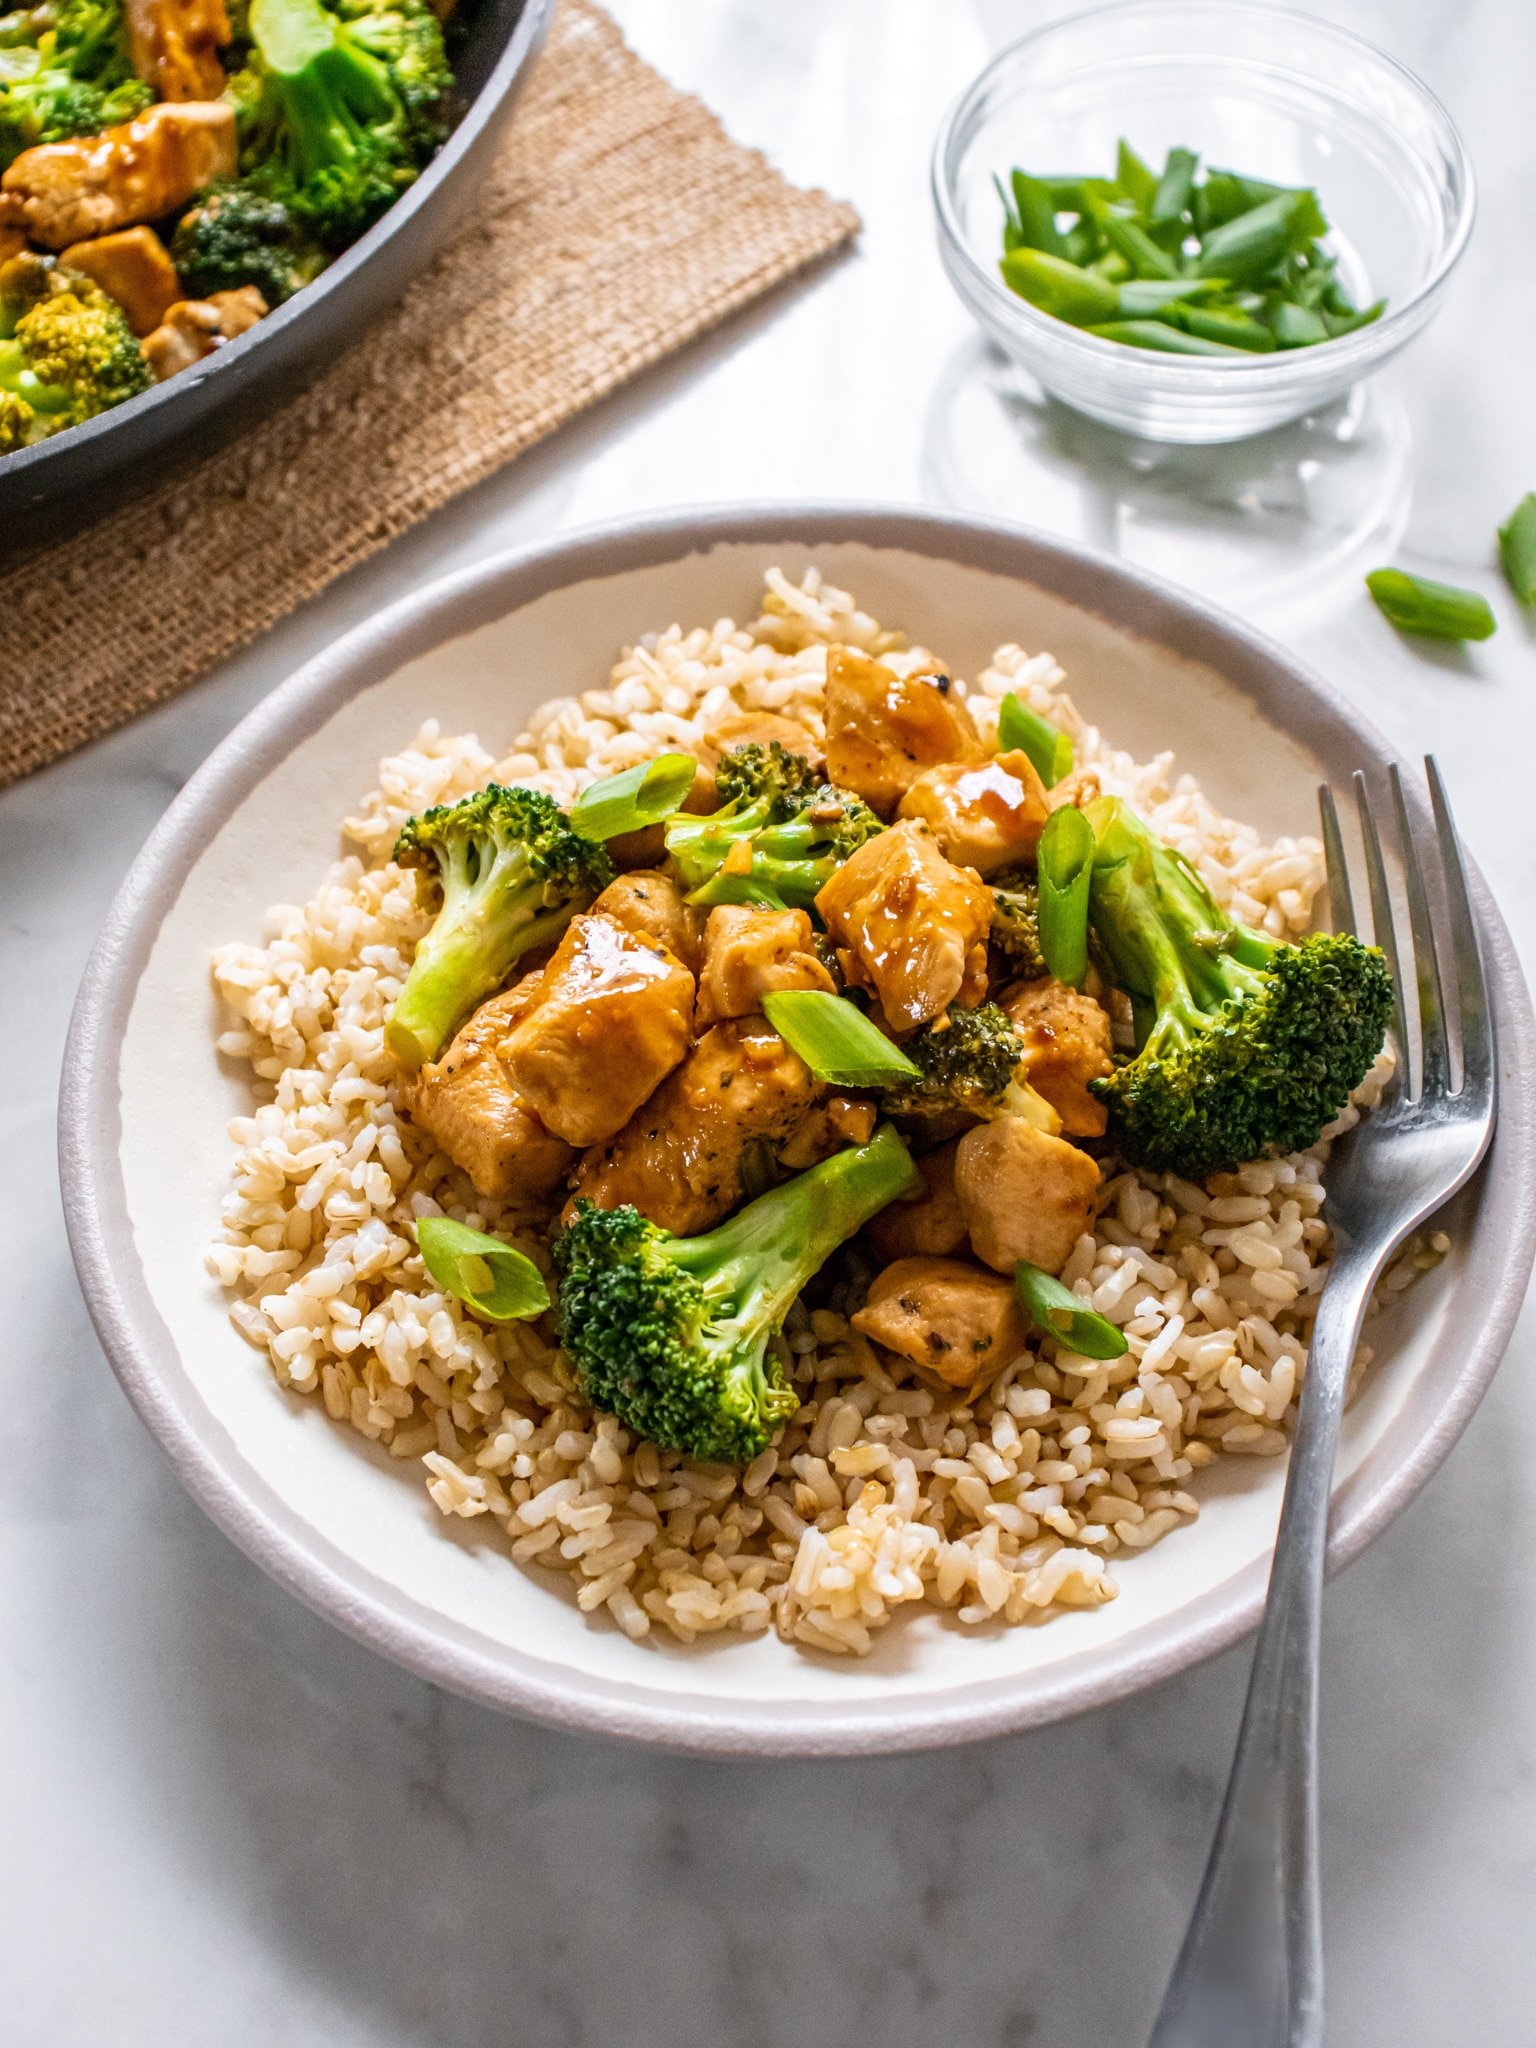 Broccoli and ginger meals